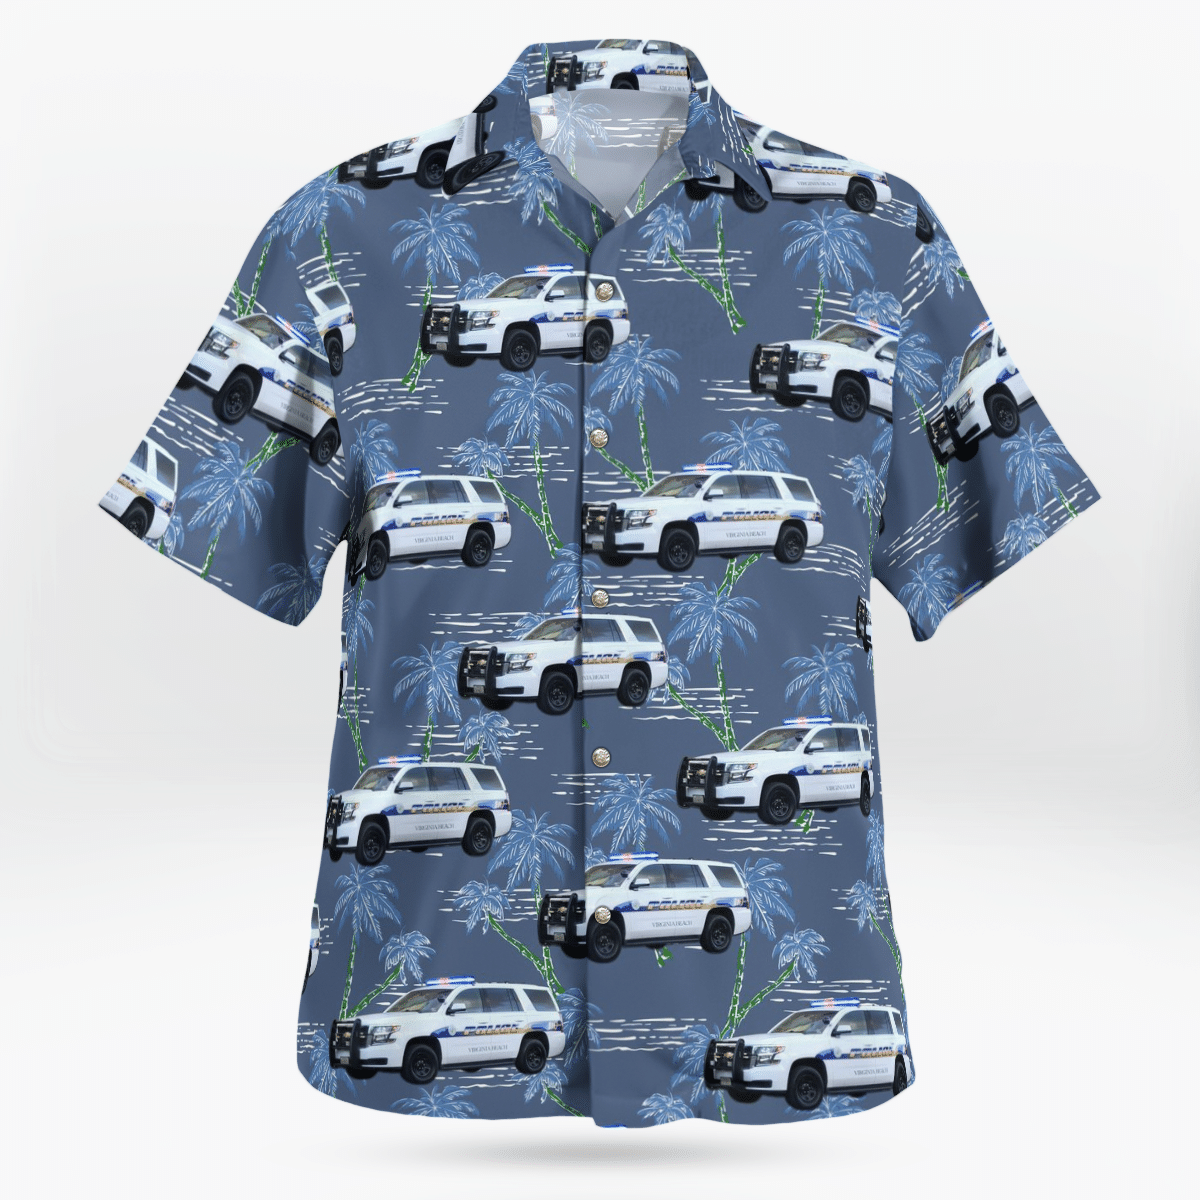 Hawaiian shirts never go out of style 255